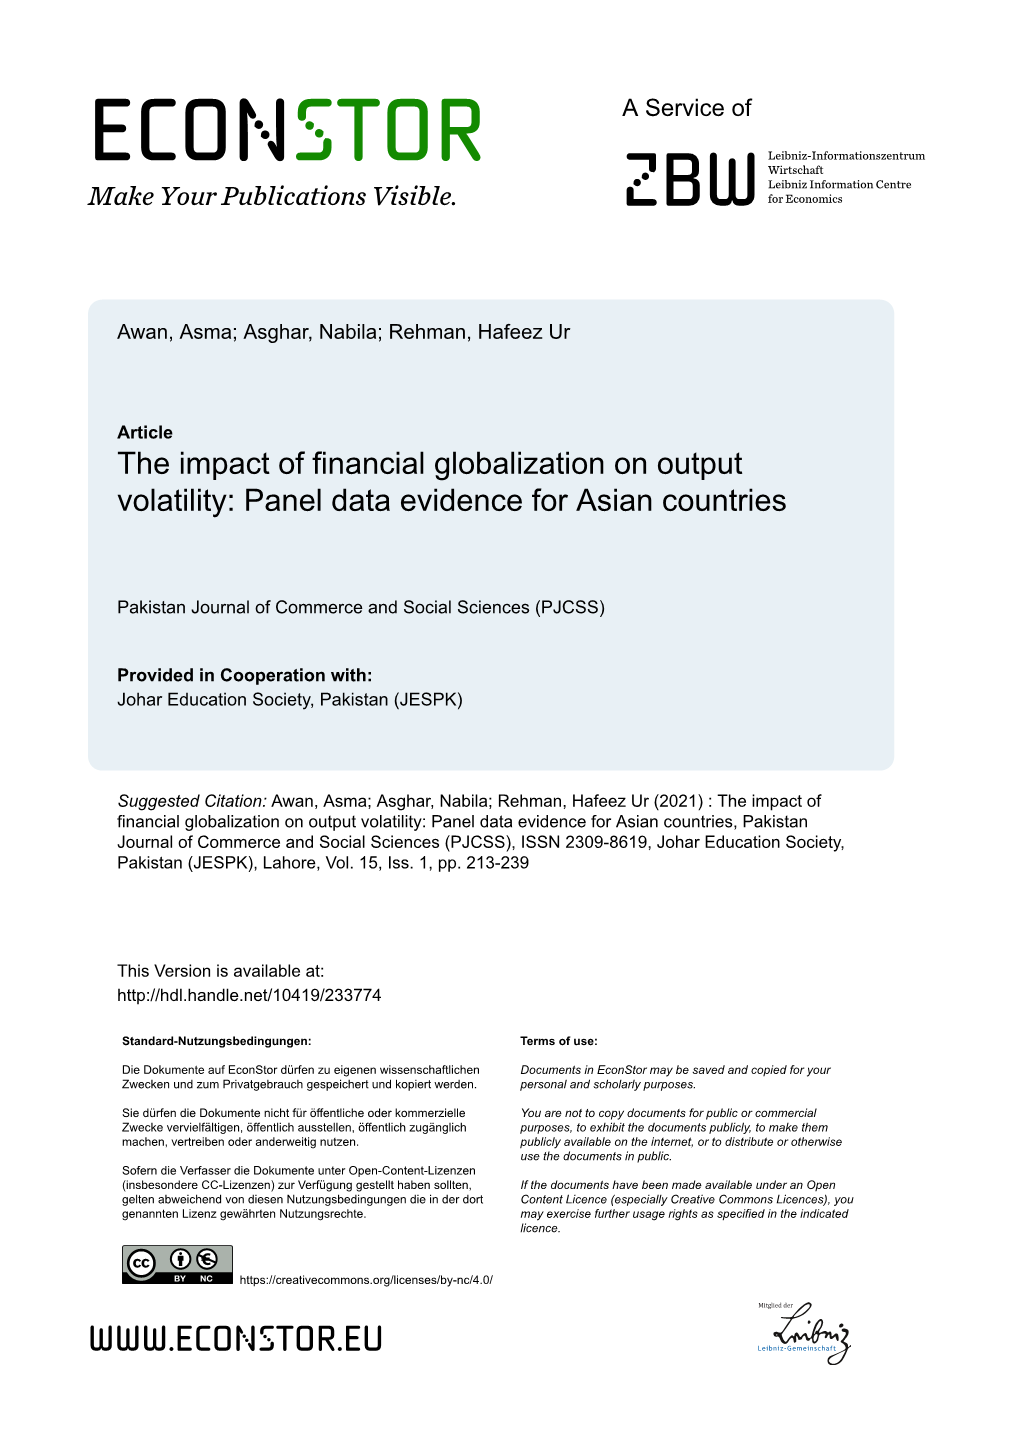 The Impact of Financial Globalization on Output Volatility: Panel Data Evidence for Asian Countries